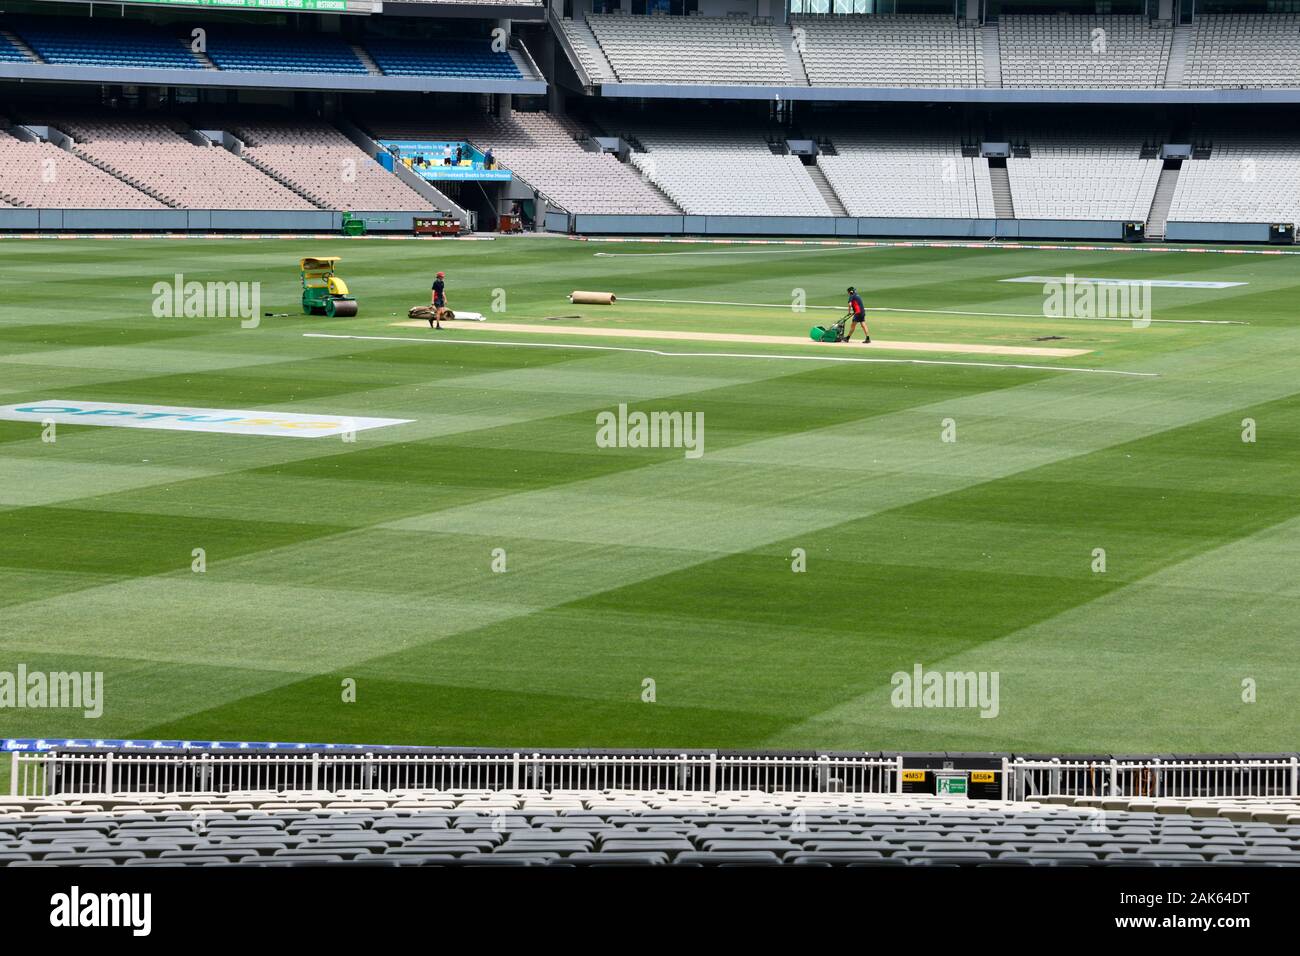 Cricket Pitch preparation at the MCG - Melbourne Cricket Ground), with green grass, workers and seating. Stock Photo